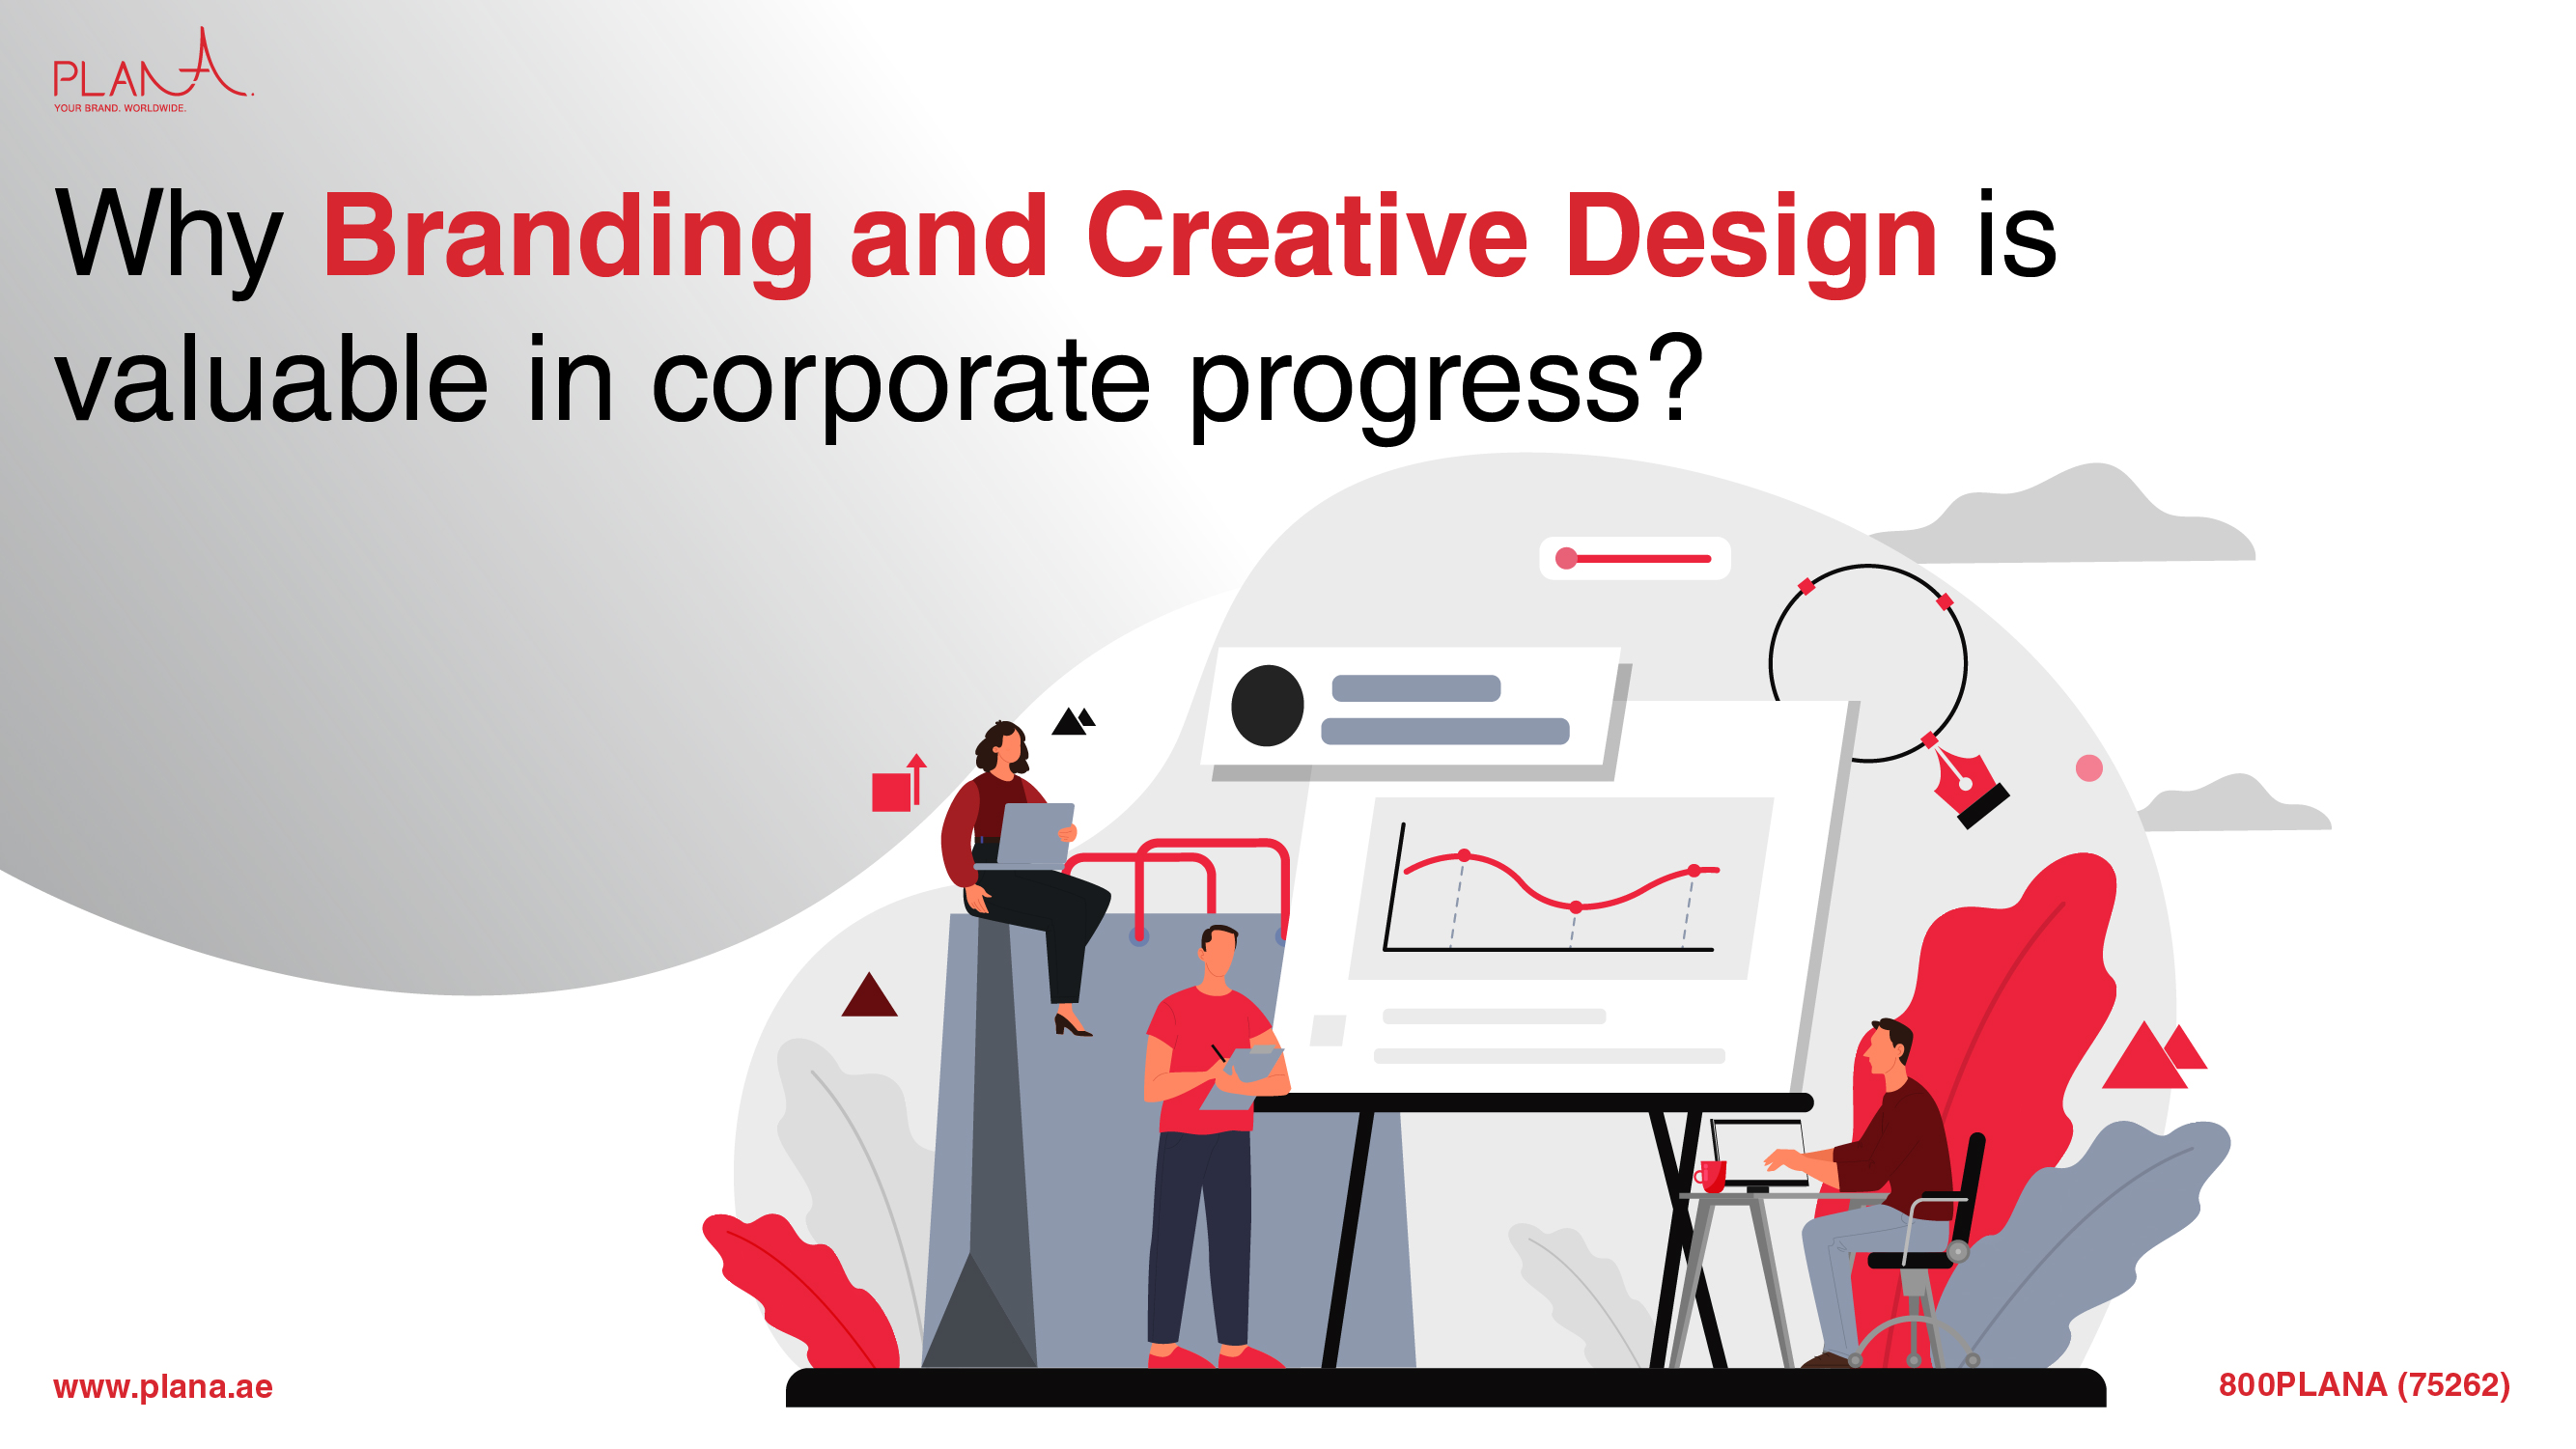 Why Branding and Creative Design is Valuable in Corporate Progress?